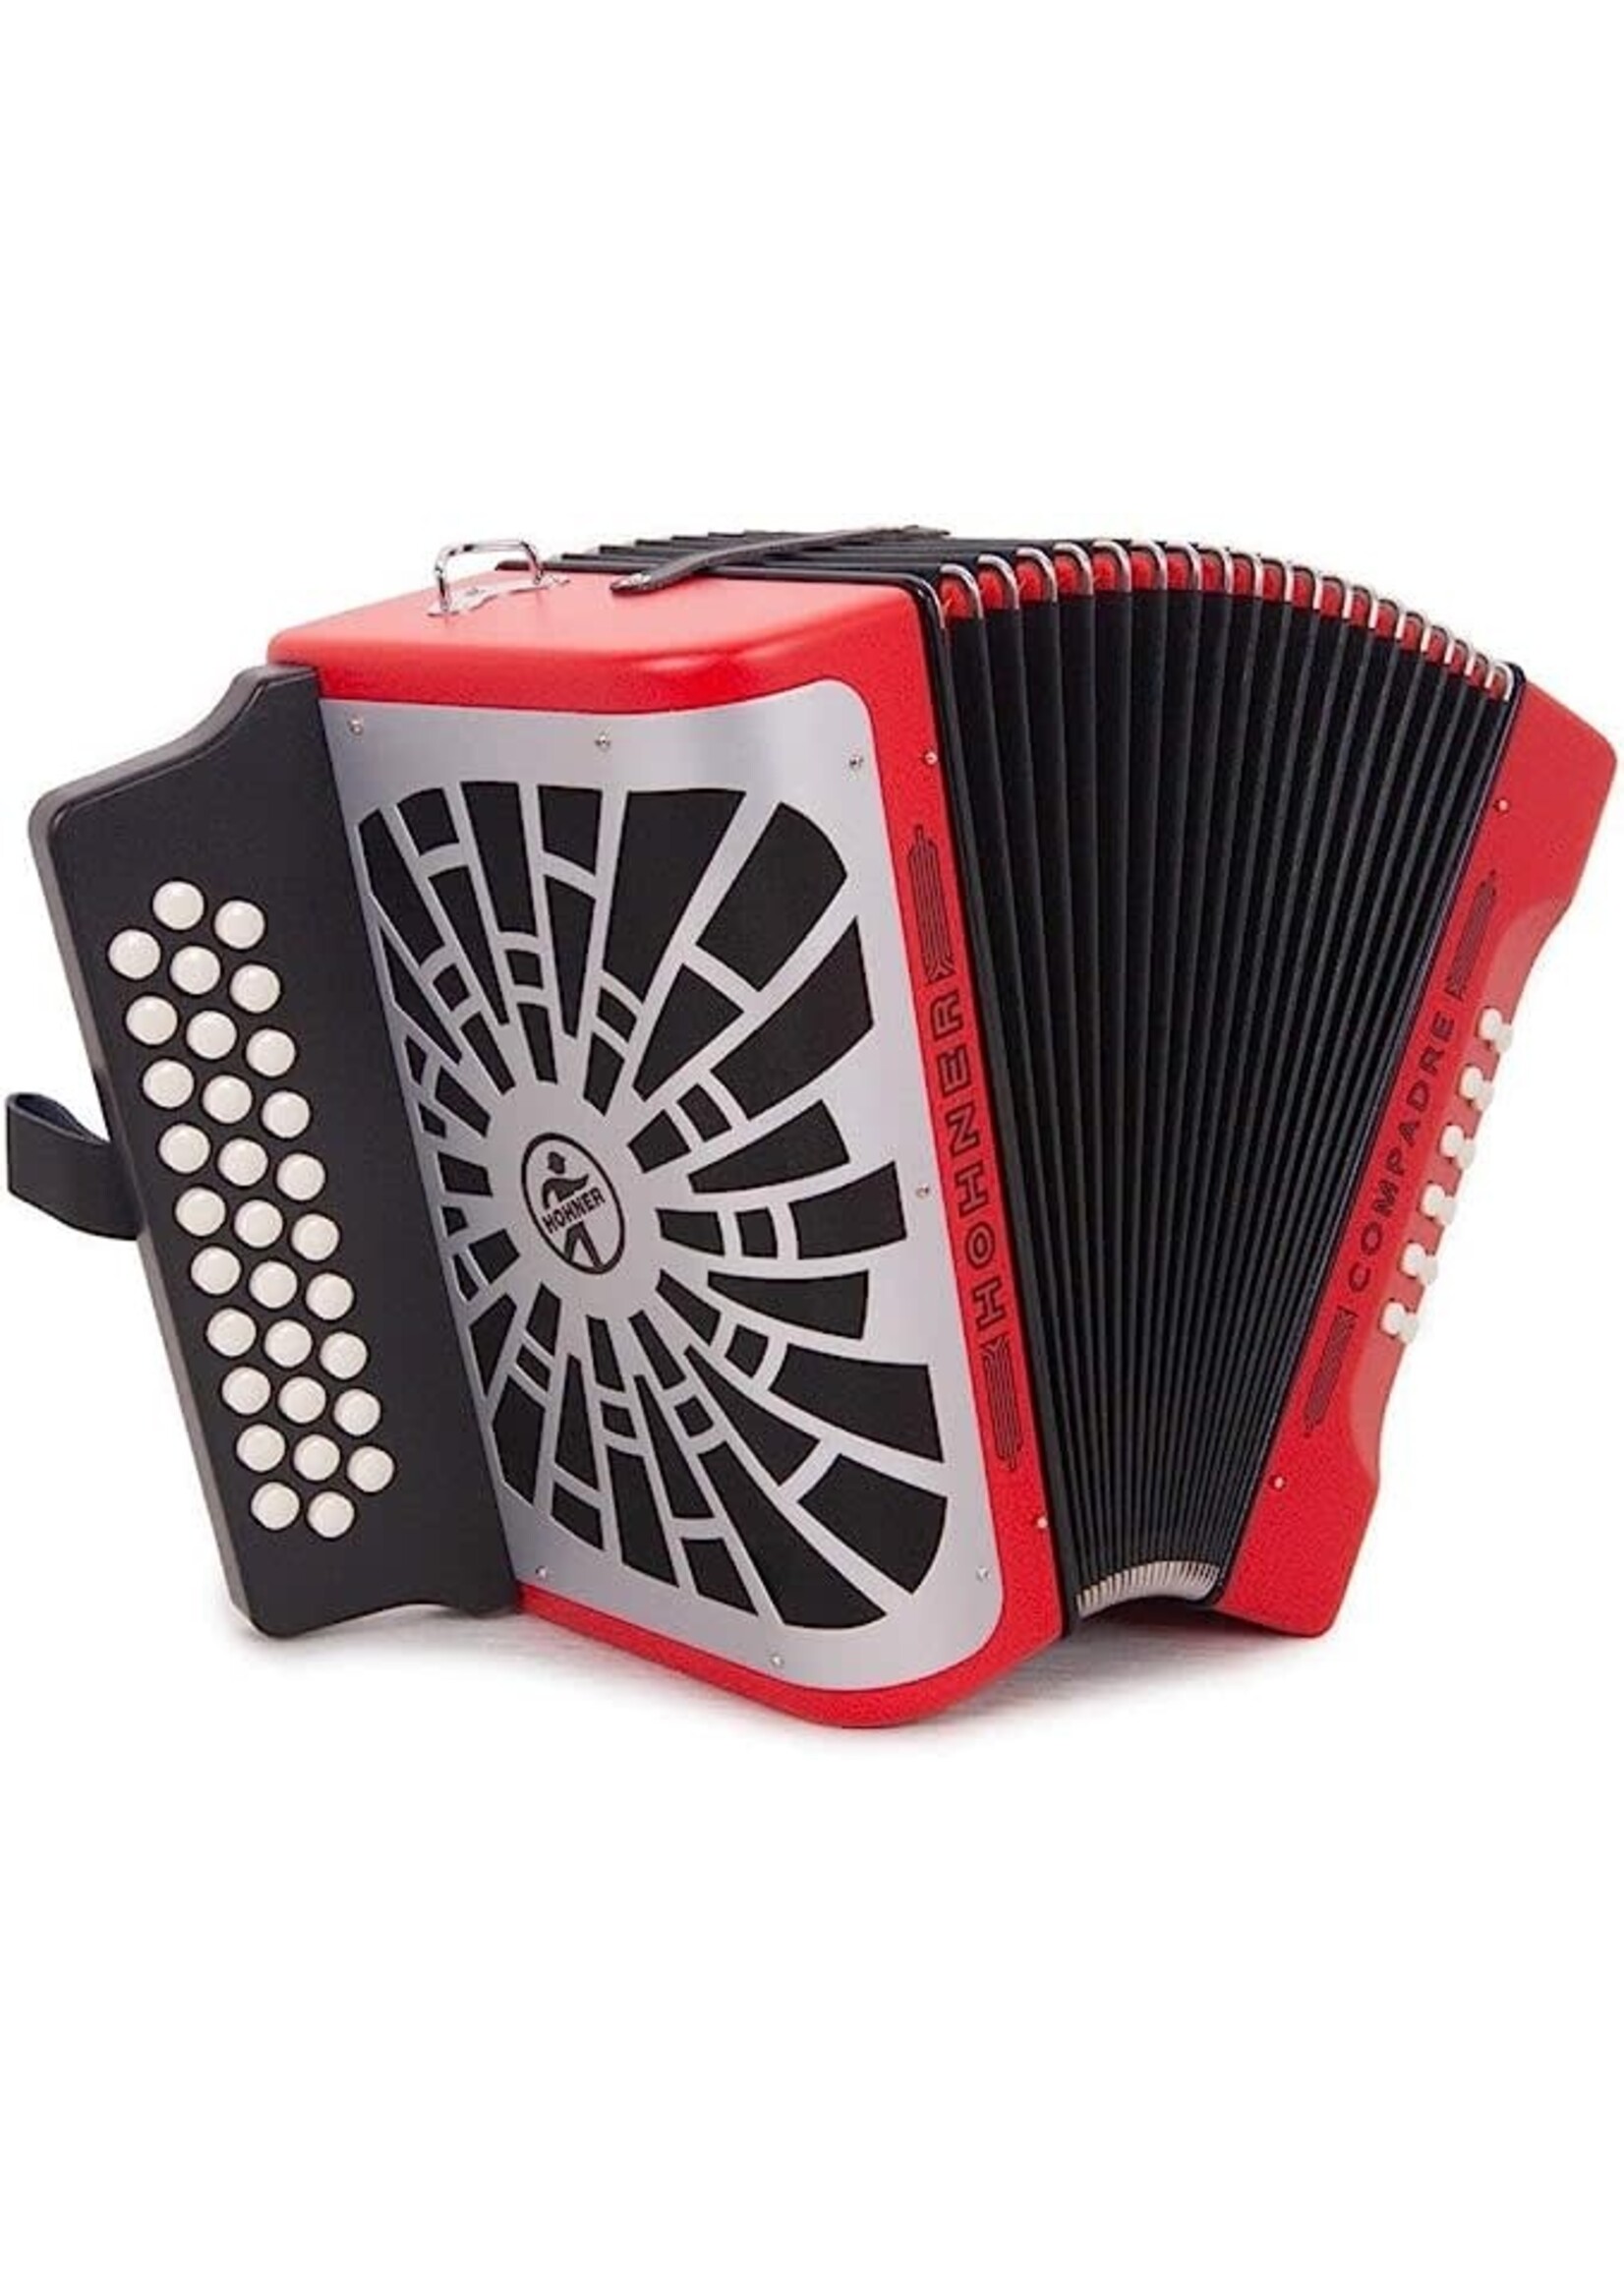 Hohner Hohner COFR-N Compadre FBbEb Accordion, Red